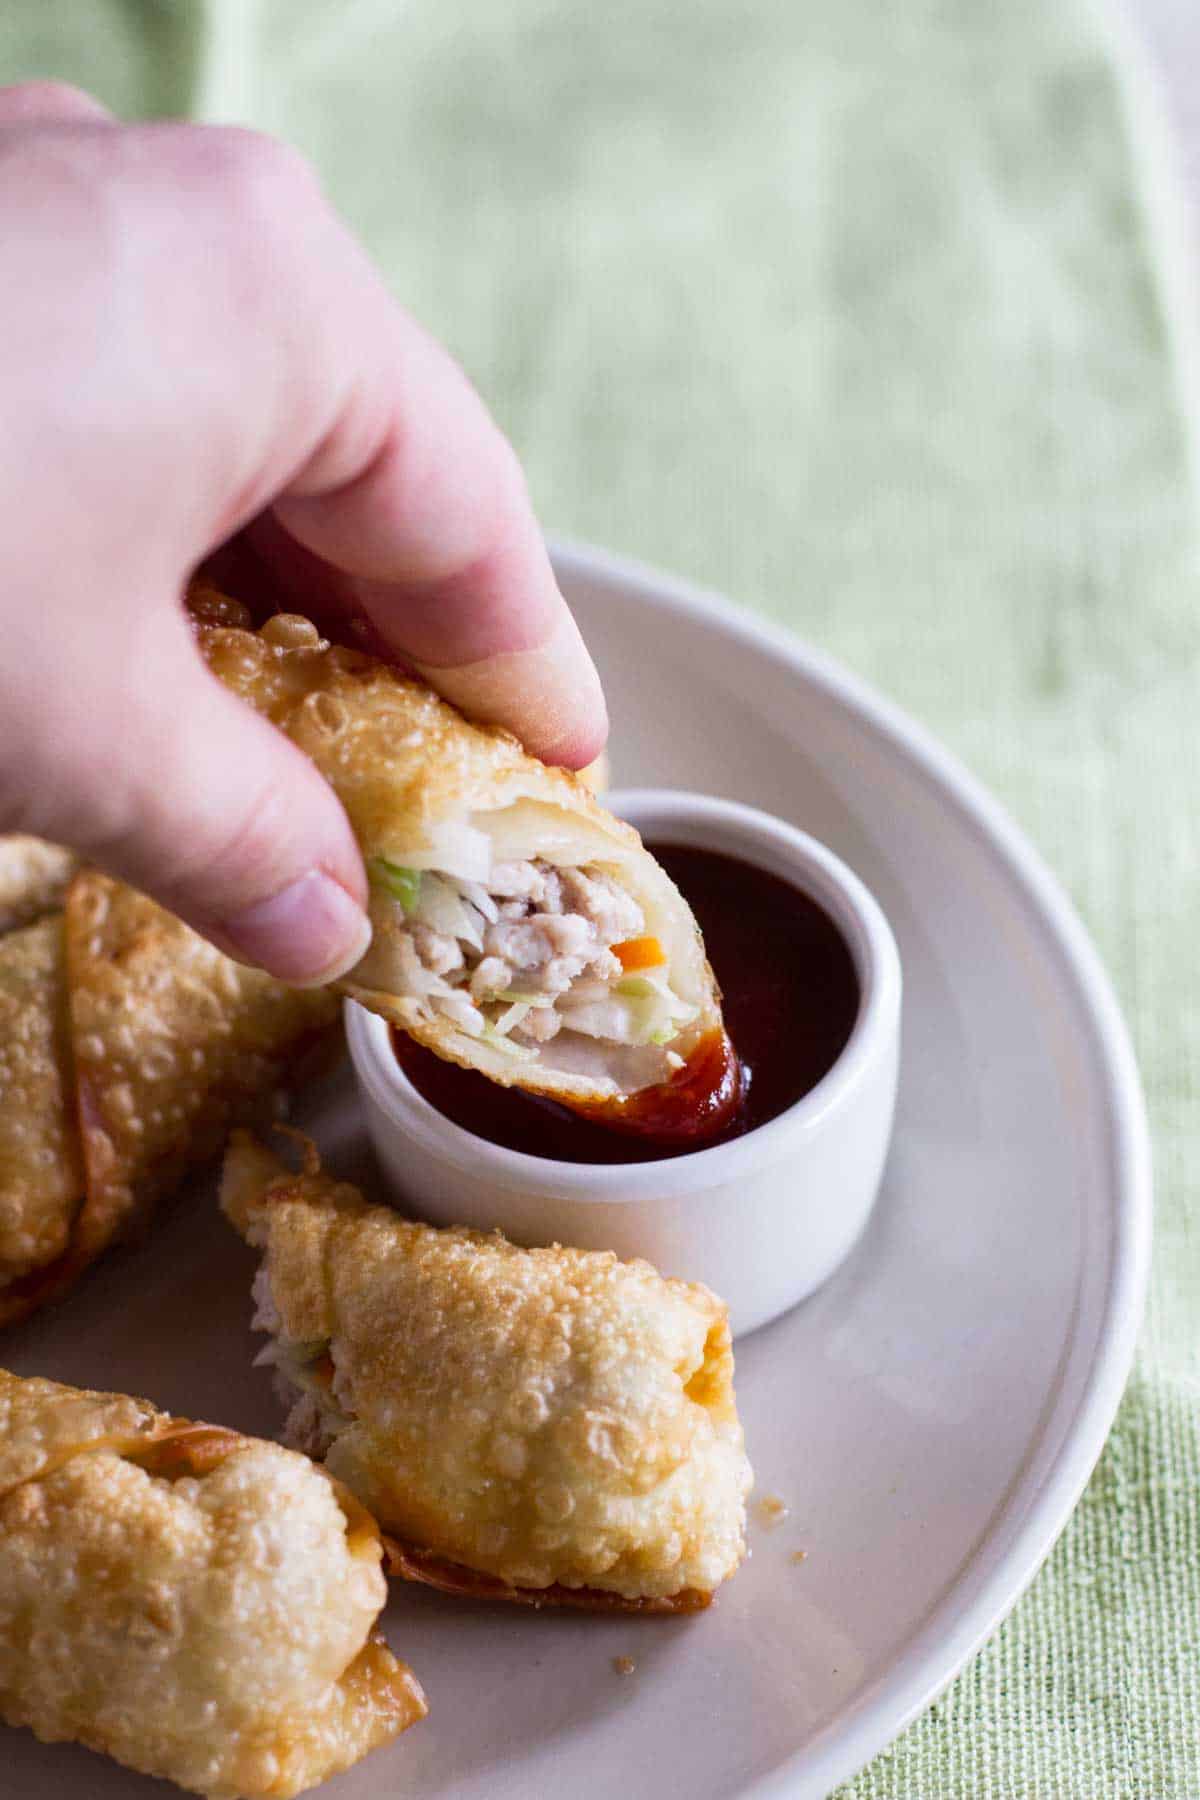 dipping an egg roll into sweet and sour sauce